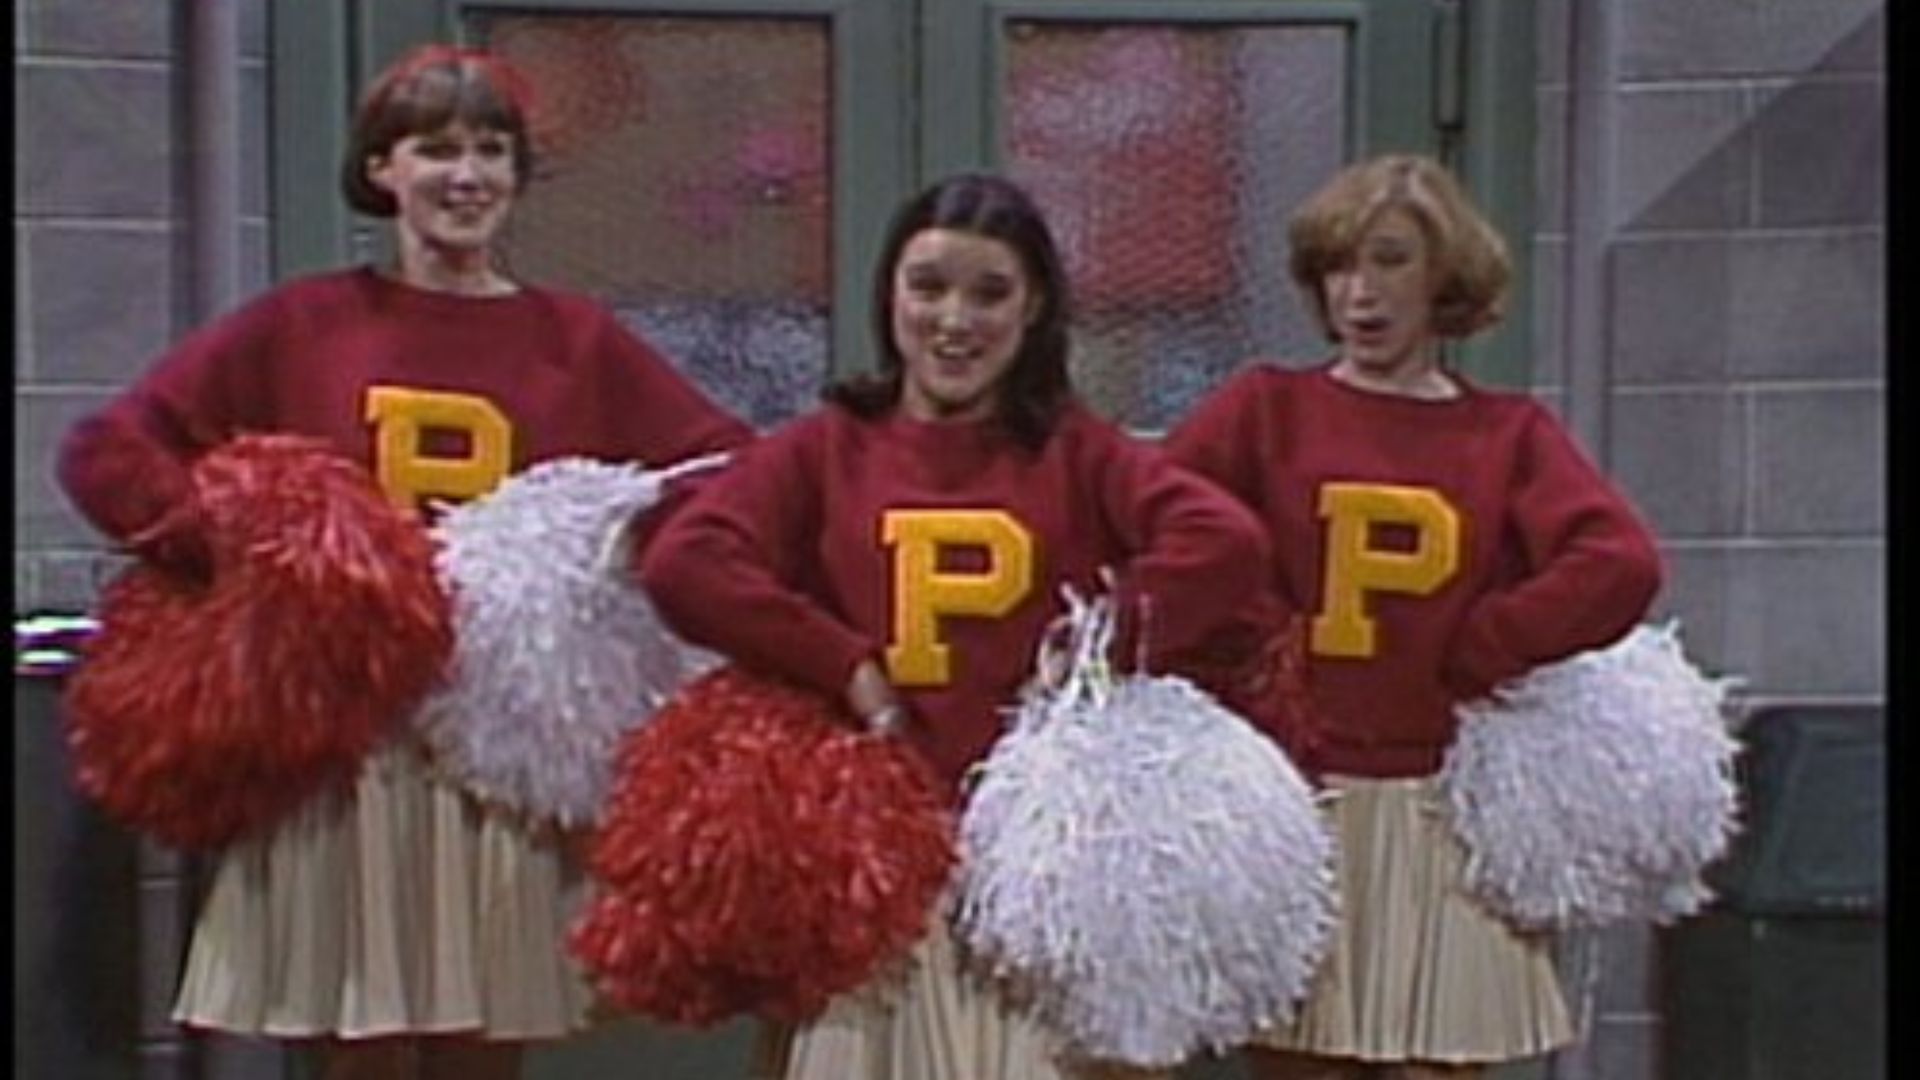 Robin Duke Working As Cheerleader With Colleagues